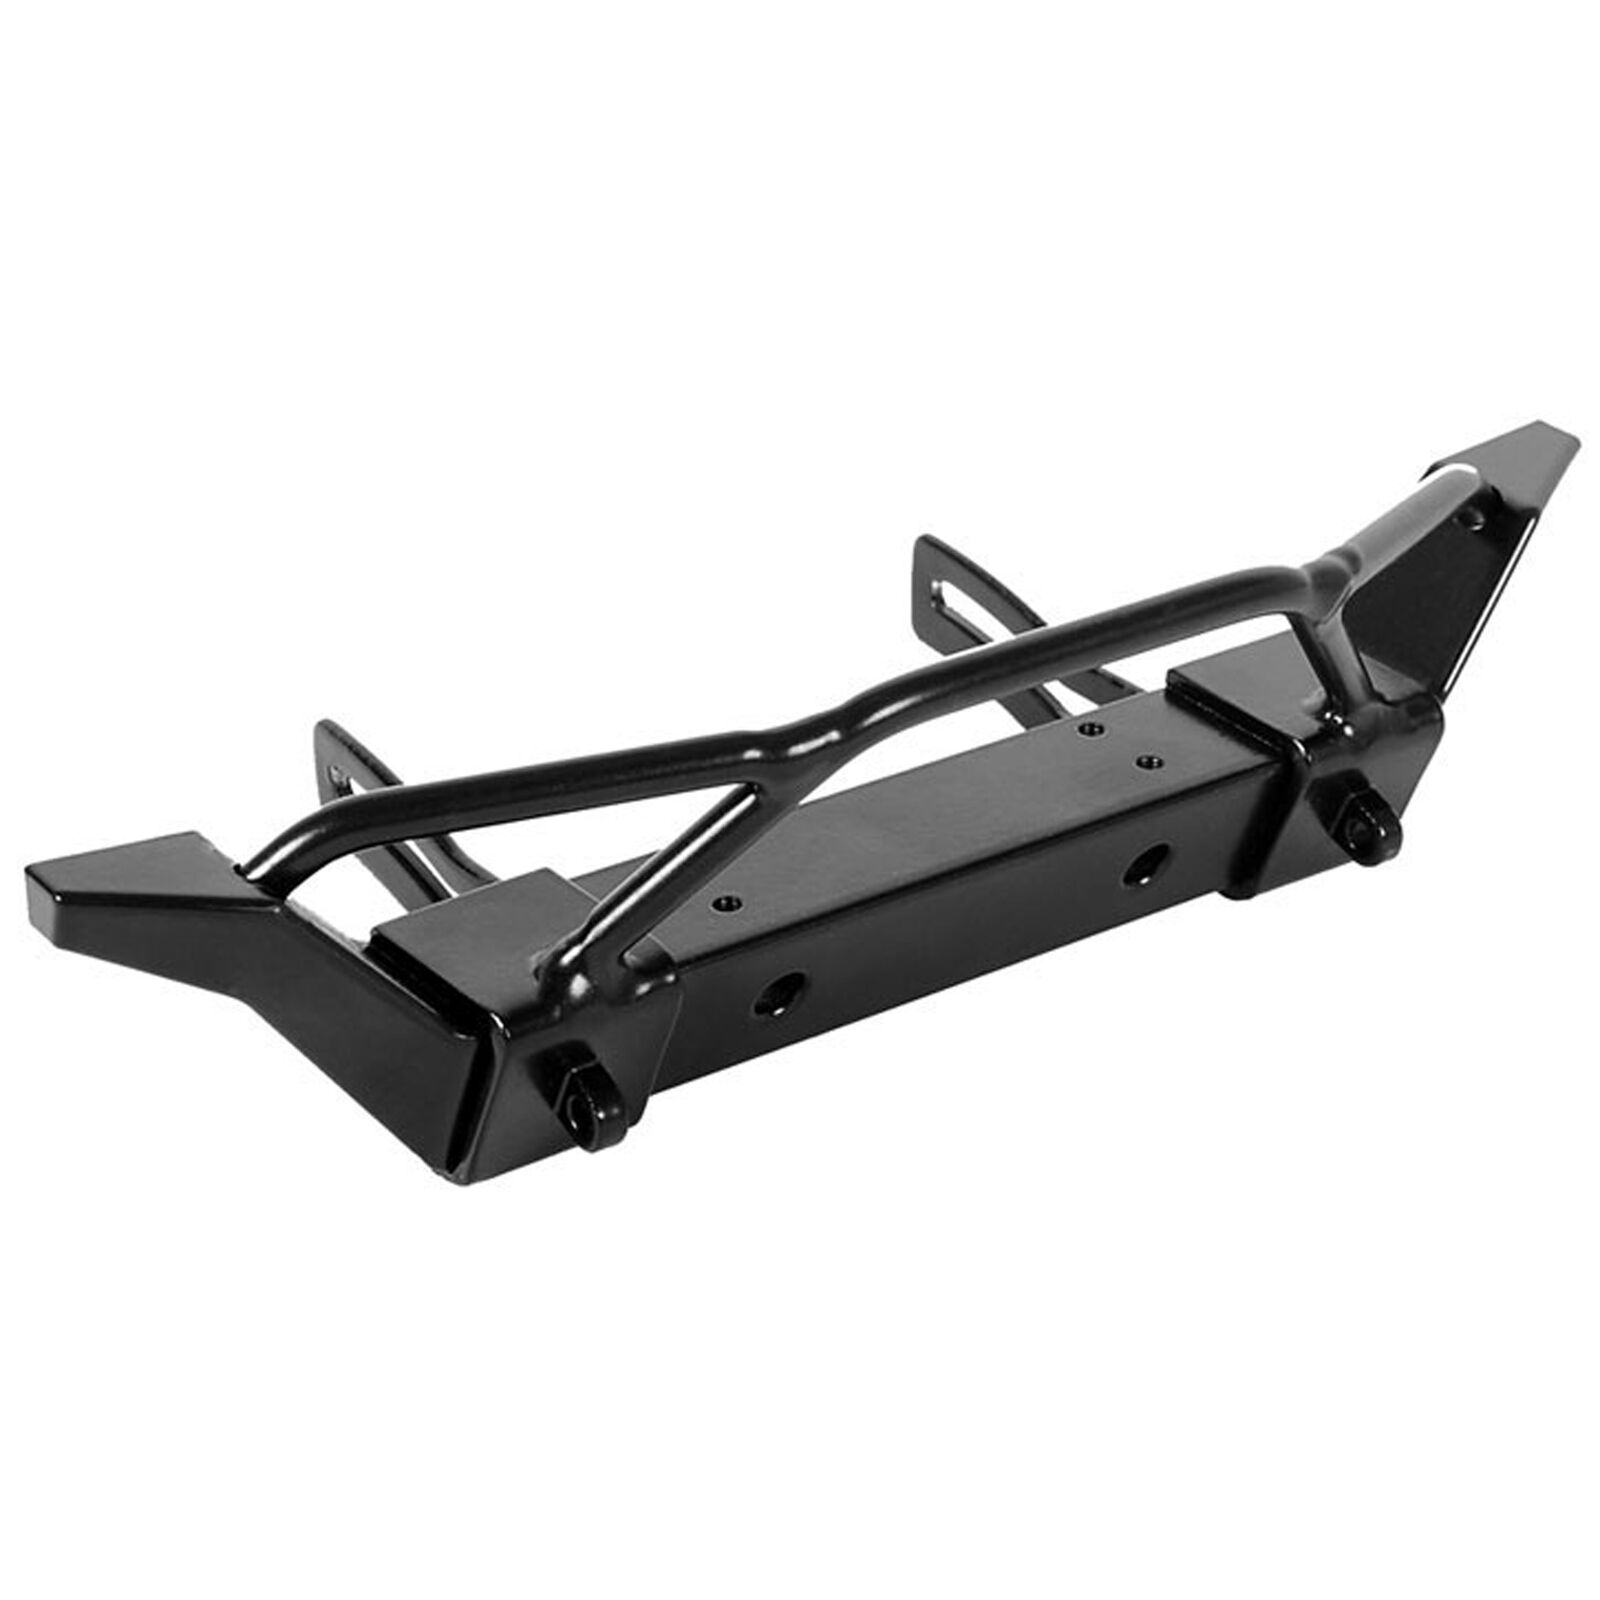 Jeep JK Rampage Recovery Bumper: Axial SCX10